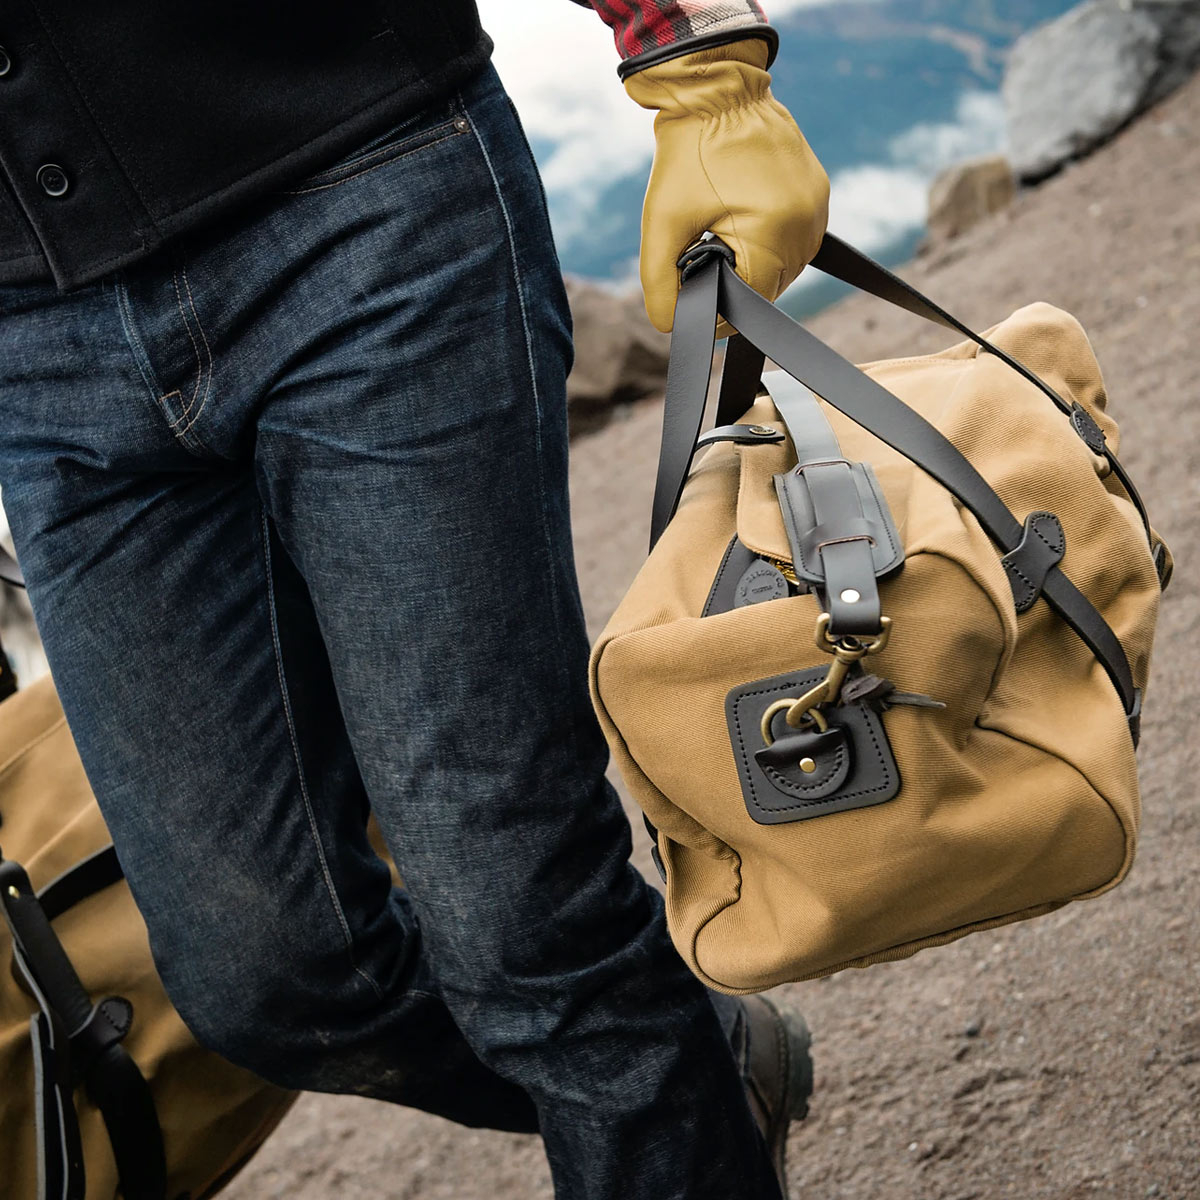 Filson Rugged Twill Duffle Bag Small Tan, a water-resistant, heavy-duty duffle with leather accents